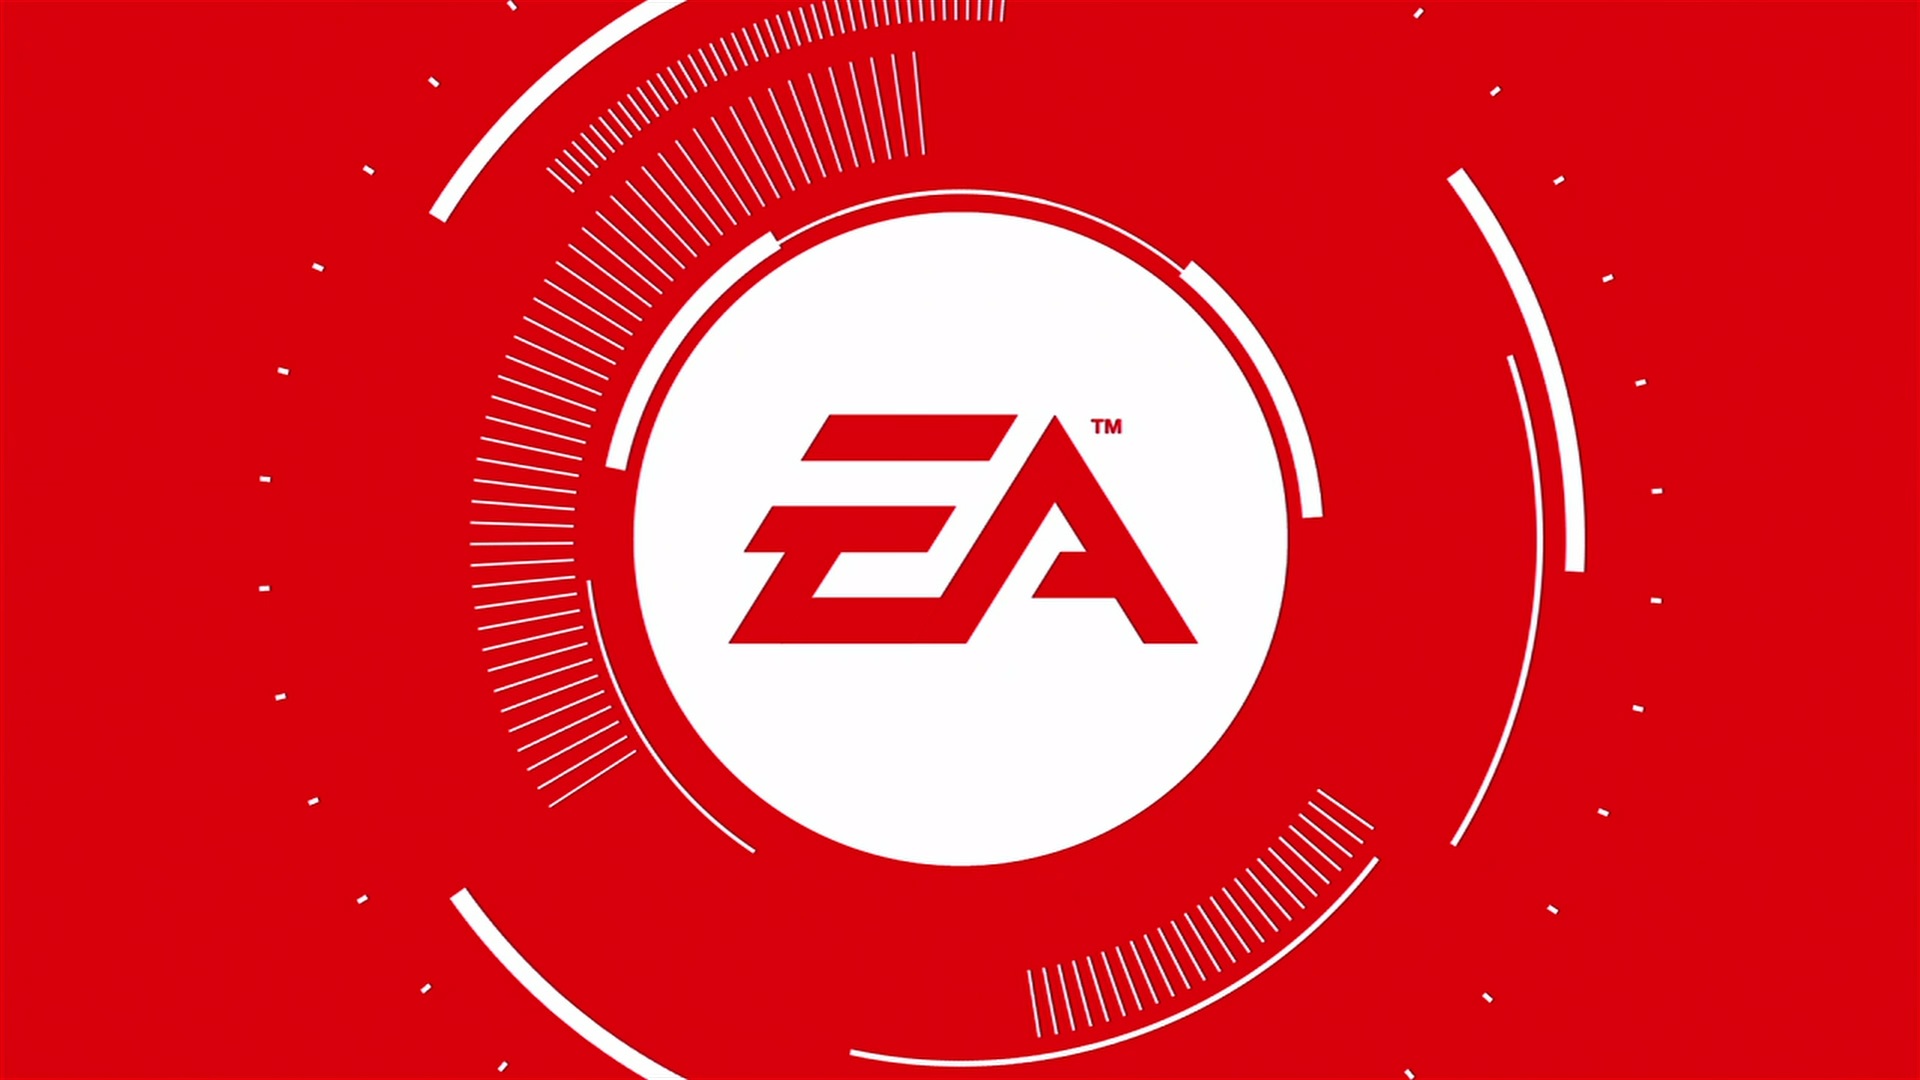 Taken from EA Press Conference Youtube Video